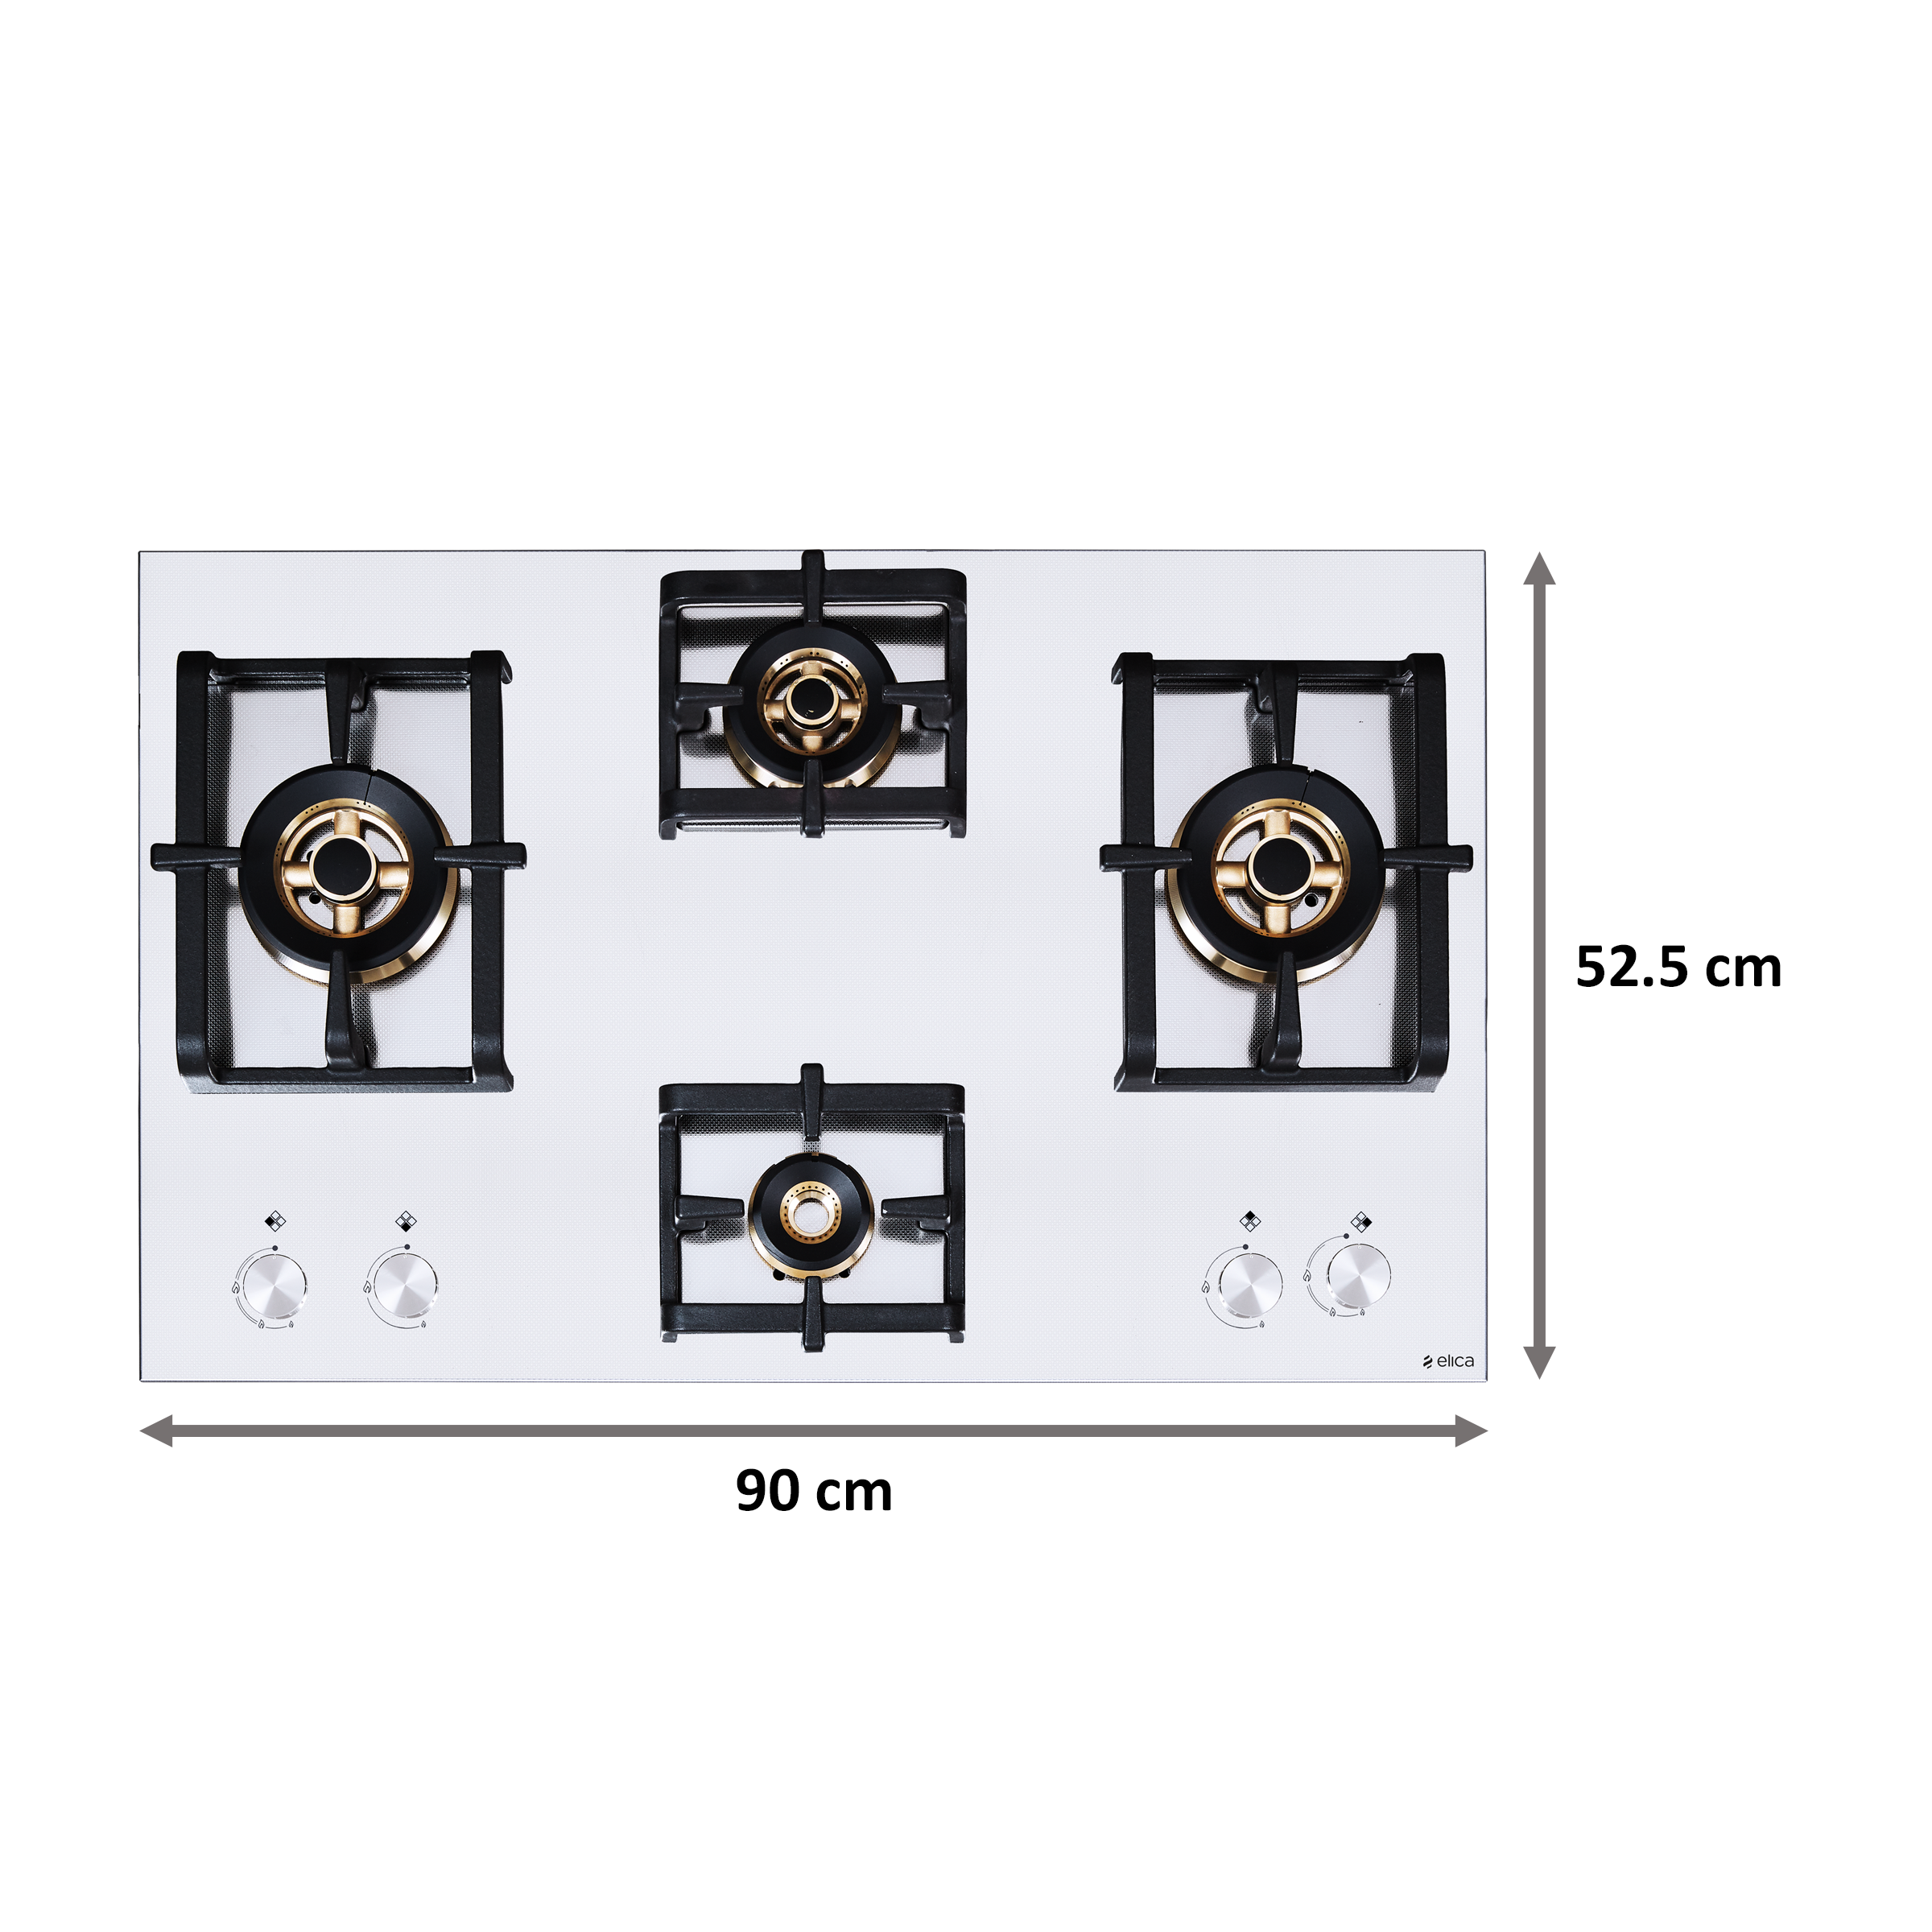 Elica Inox Pro FB MFC 4B 91 DX 4 Burner Stainless Steel Built-in Gas Hob (Cast Iron Grids, 3021, Steel)_2